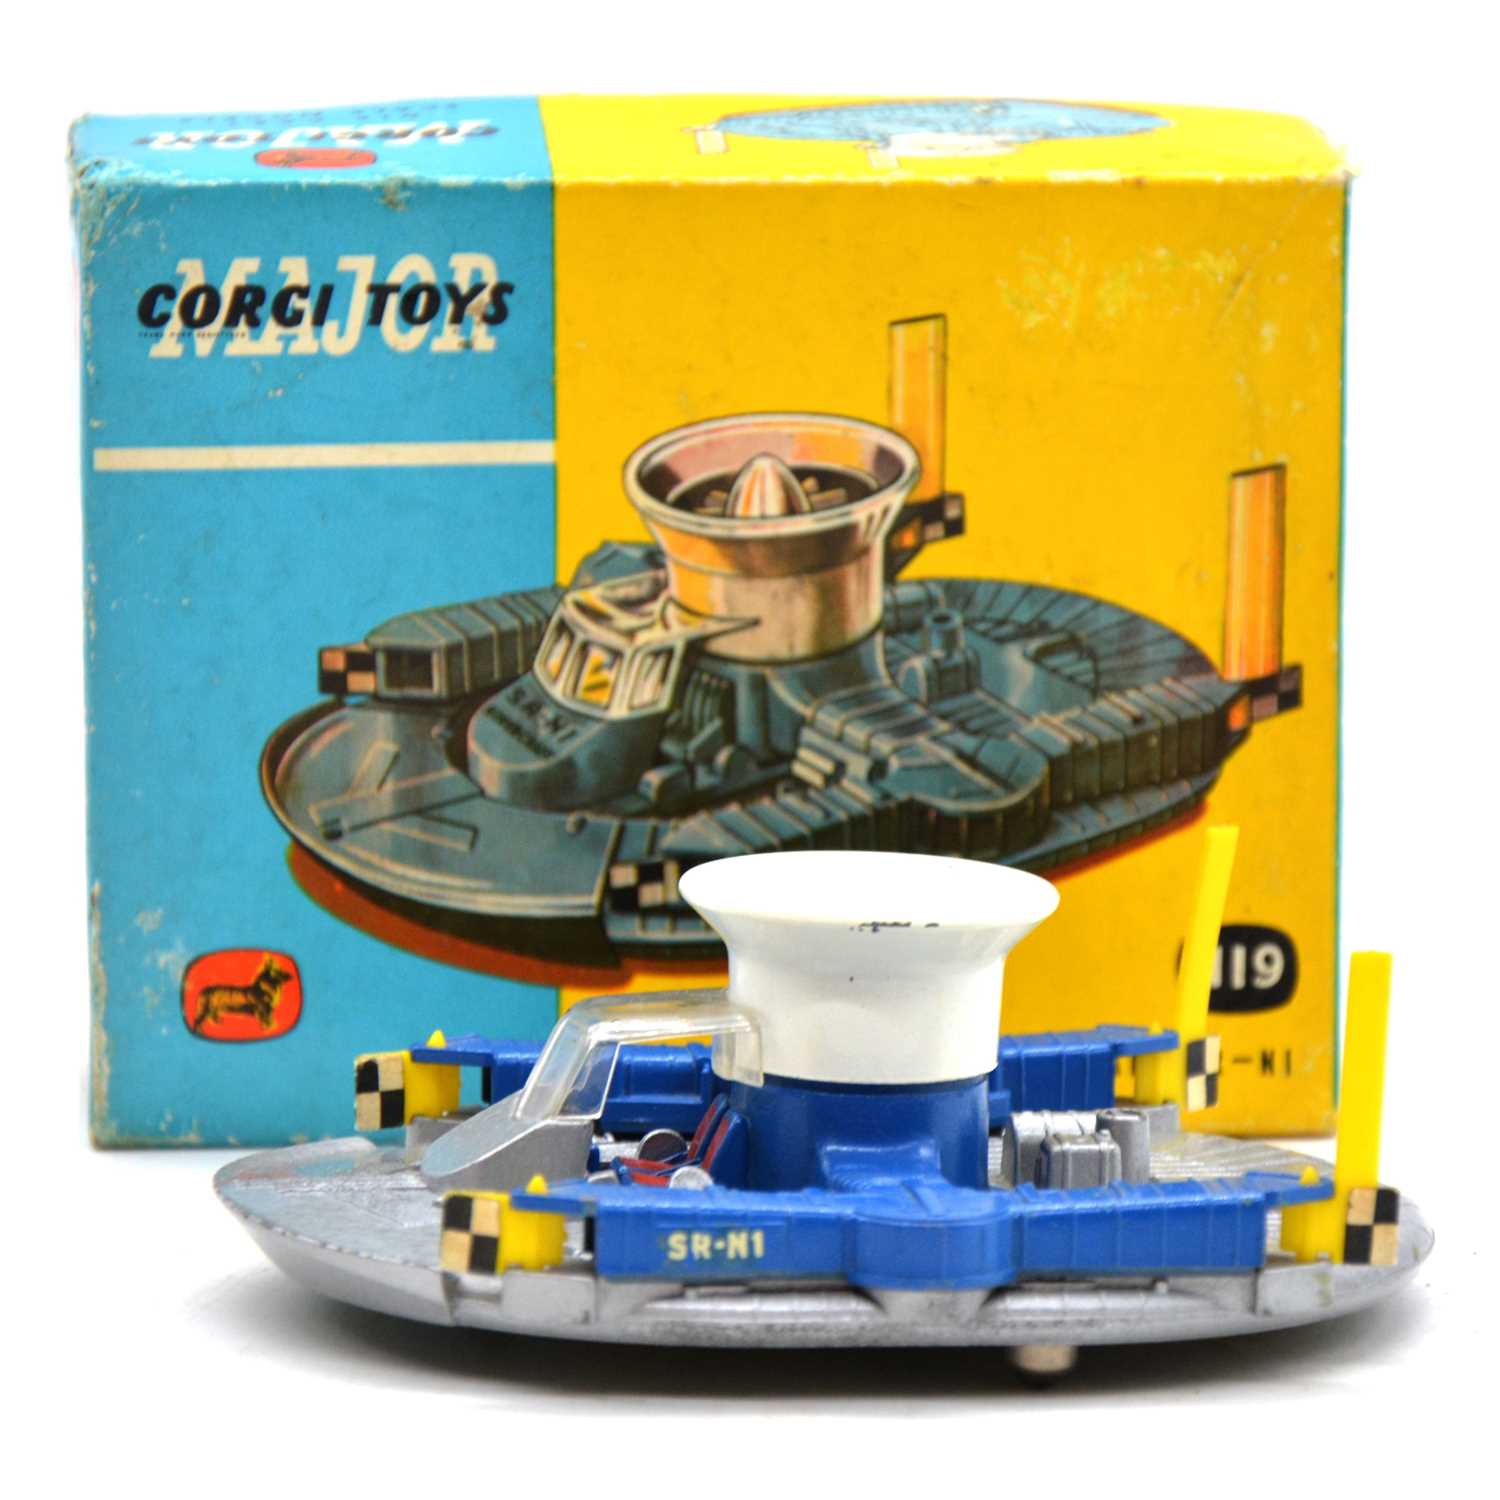 Corgi die-cast model vehicle, ref.1119 HDL Hovercraft, silver and blue, boxed